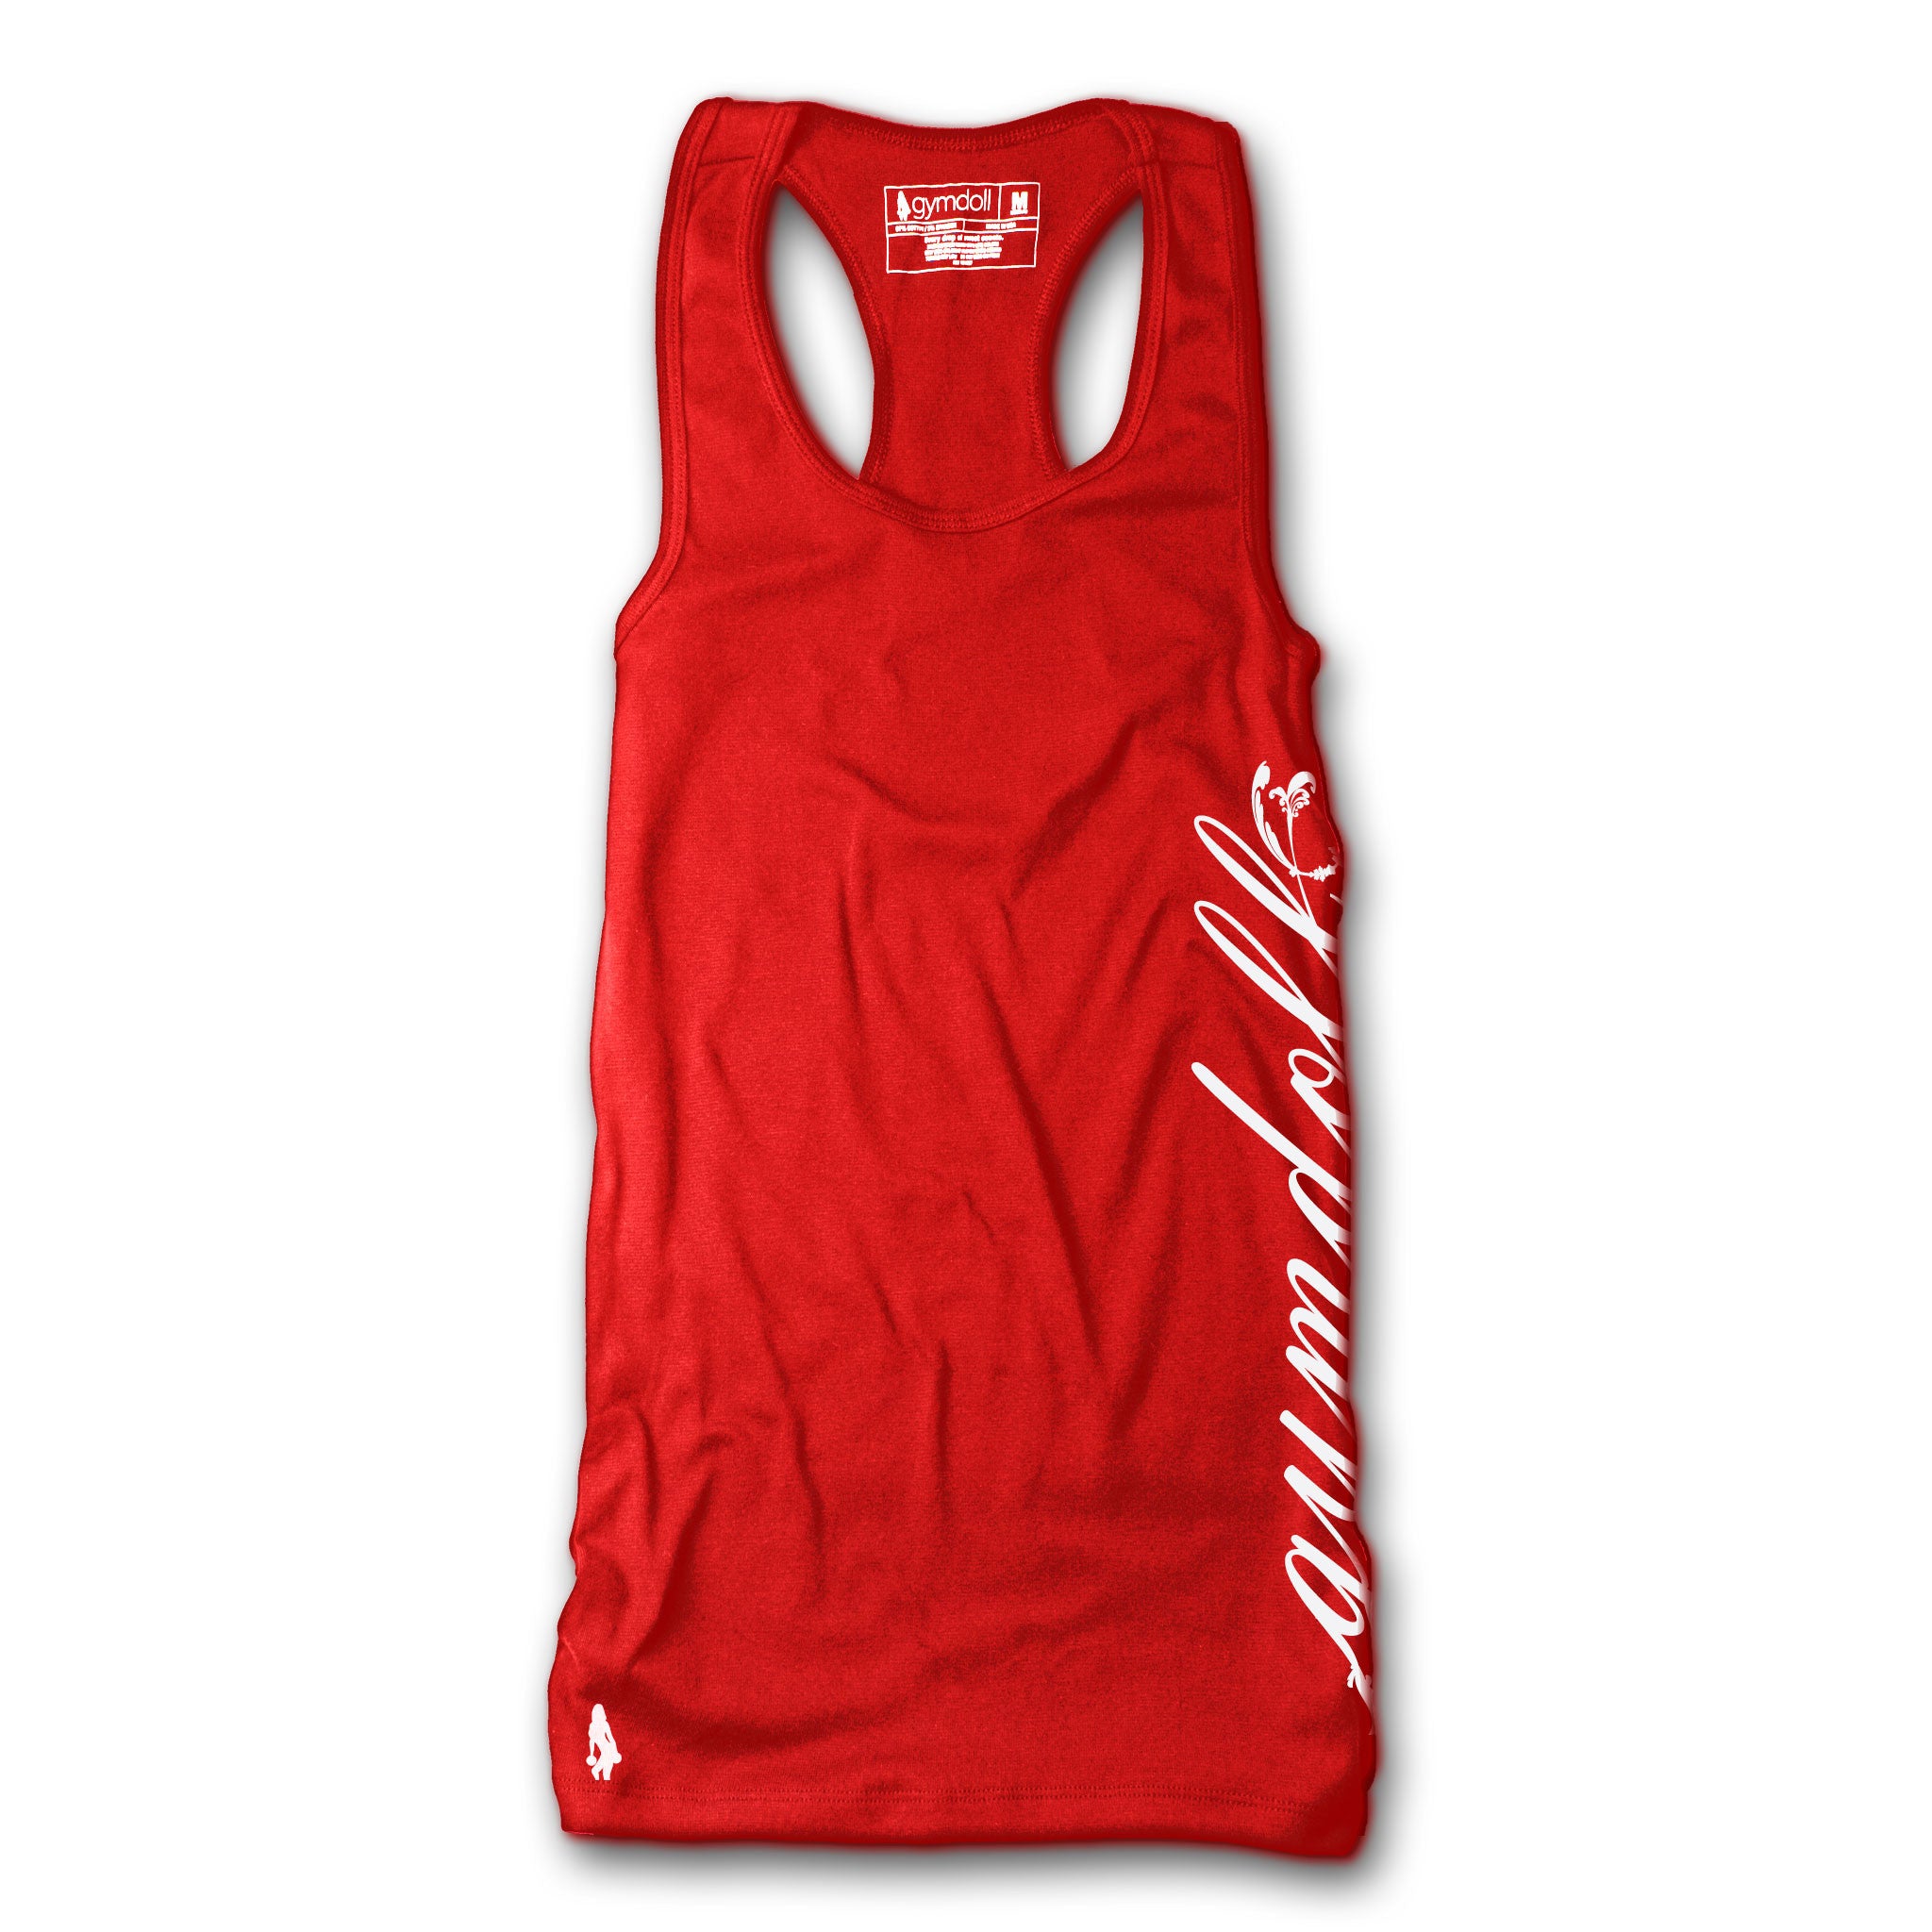 Gymdoll Racerback Active Tank - Cursive - Red/White